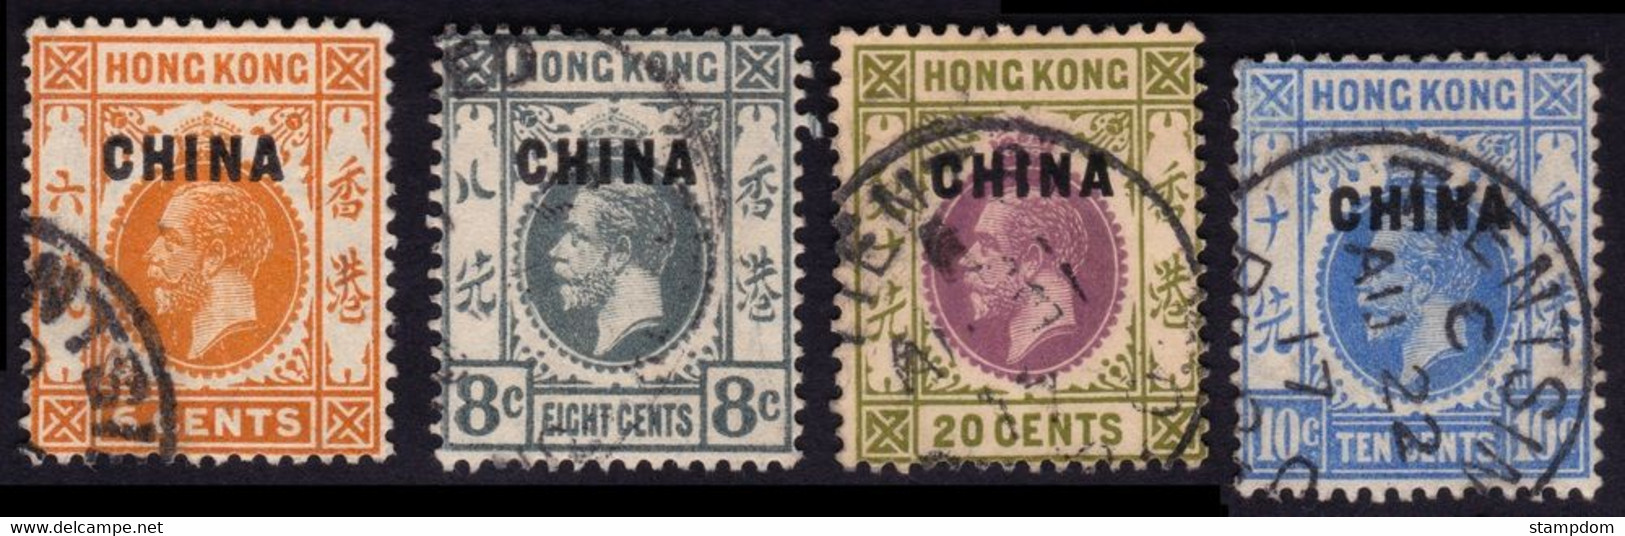 HONG KONG Overprinted With CHINA On 4 Hong Kong KG5 Stamps 6c, 8c, 10c &20c - USED @P904 - Oblitérés